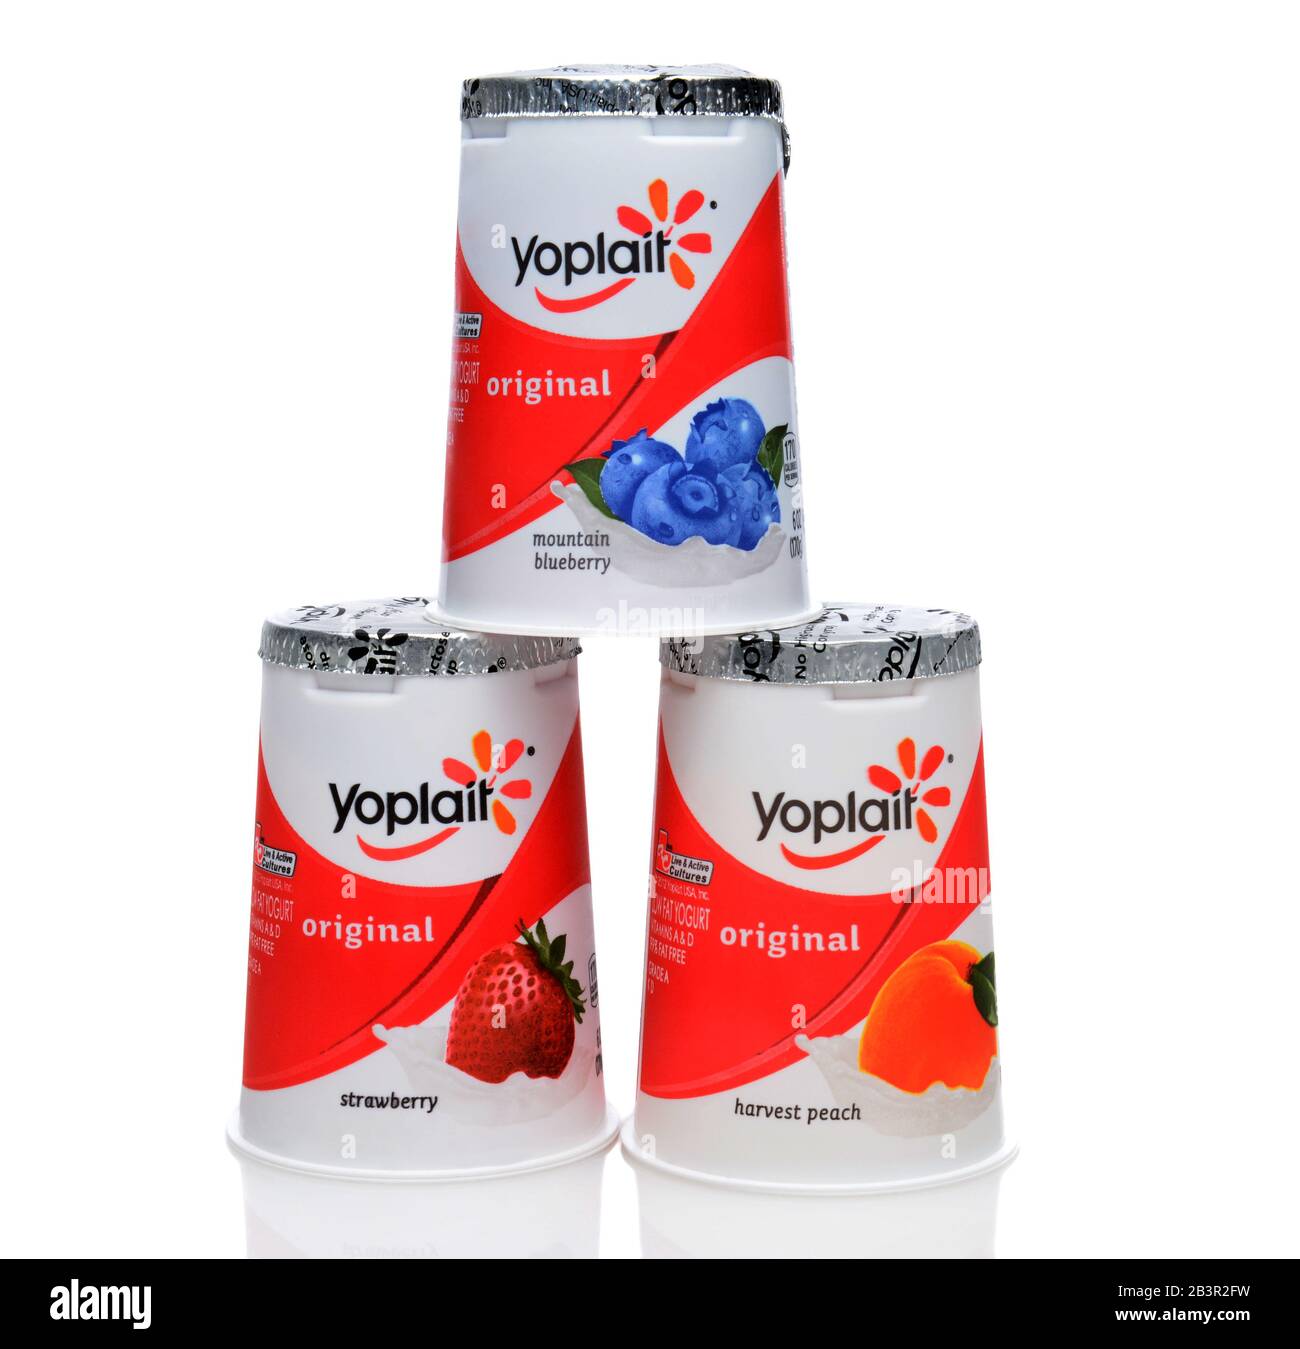 IRVINE, CA - SEPTEMBER 15, 2014: Three different containers of Yoplait Original Yogurt. In 1965, two French dairy co-operatives, Yola and Coplait, mer Stock Photo